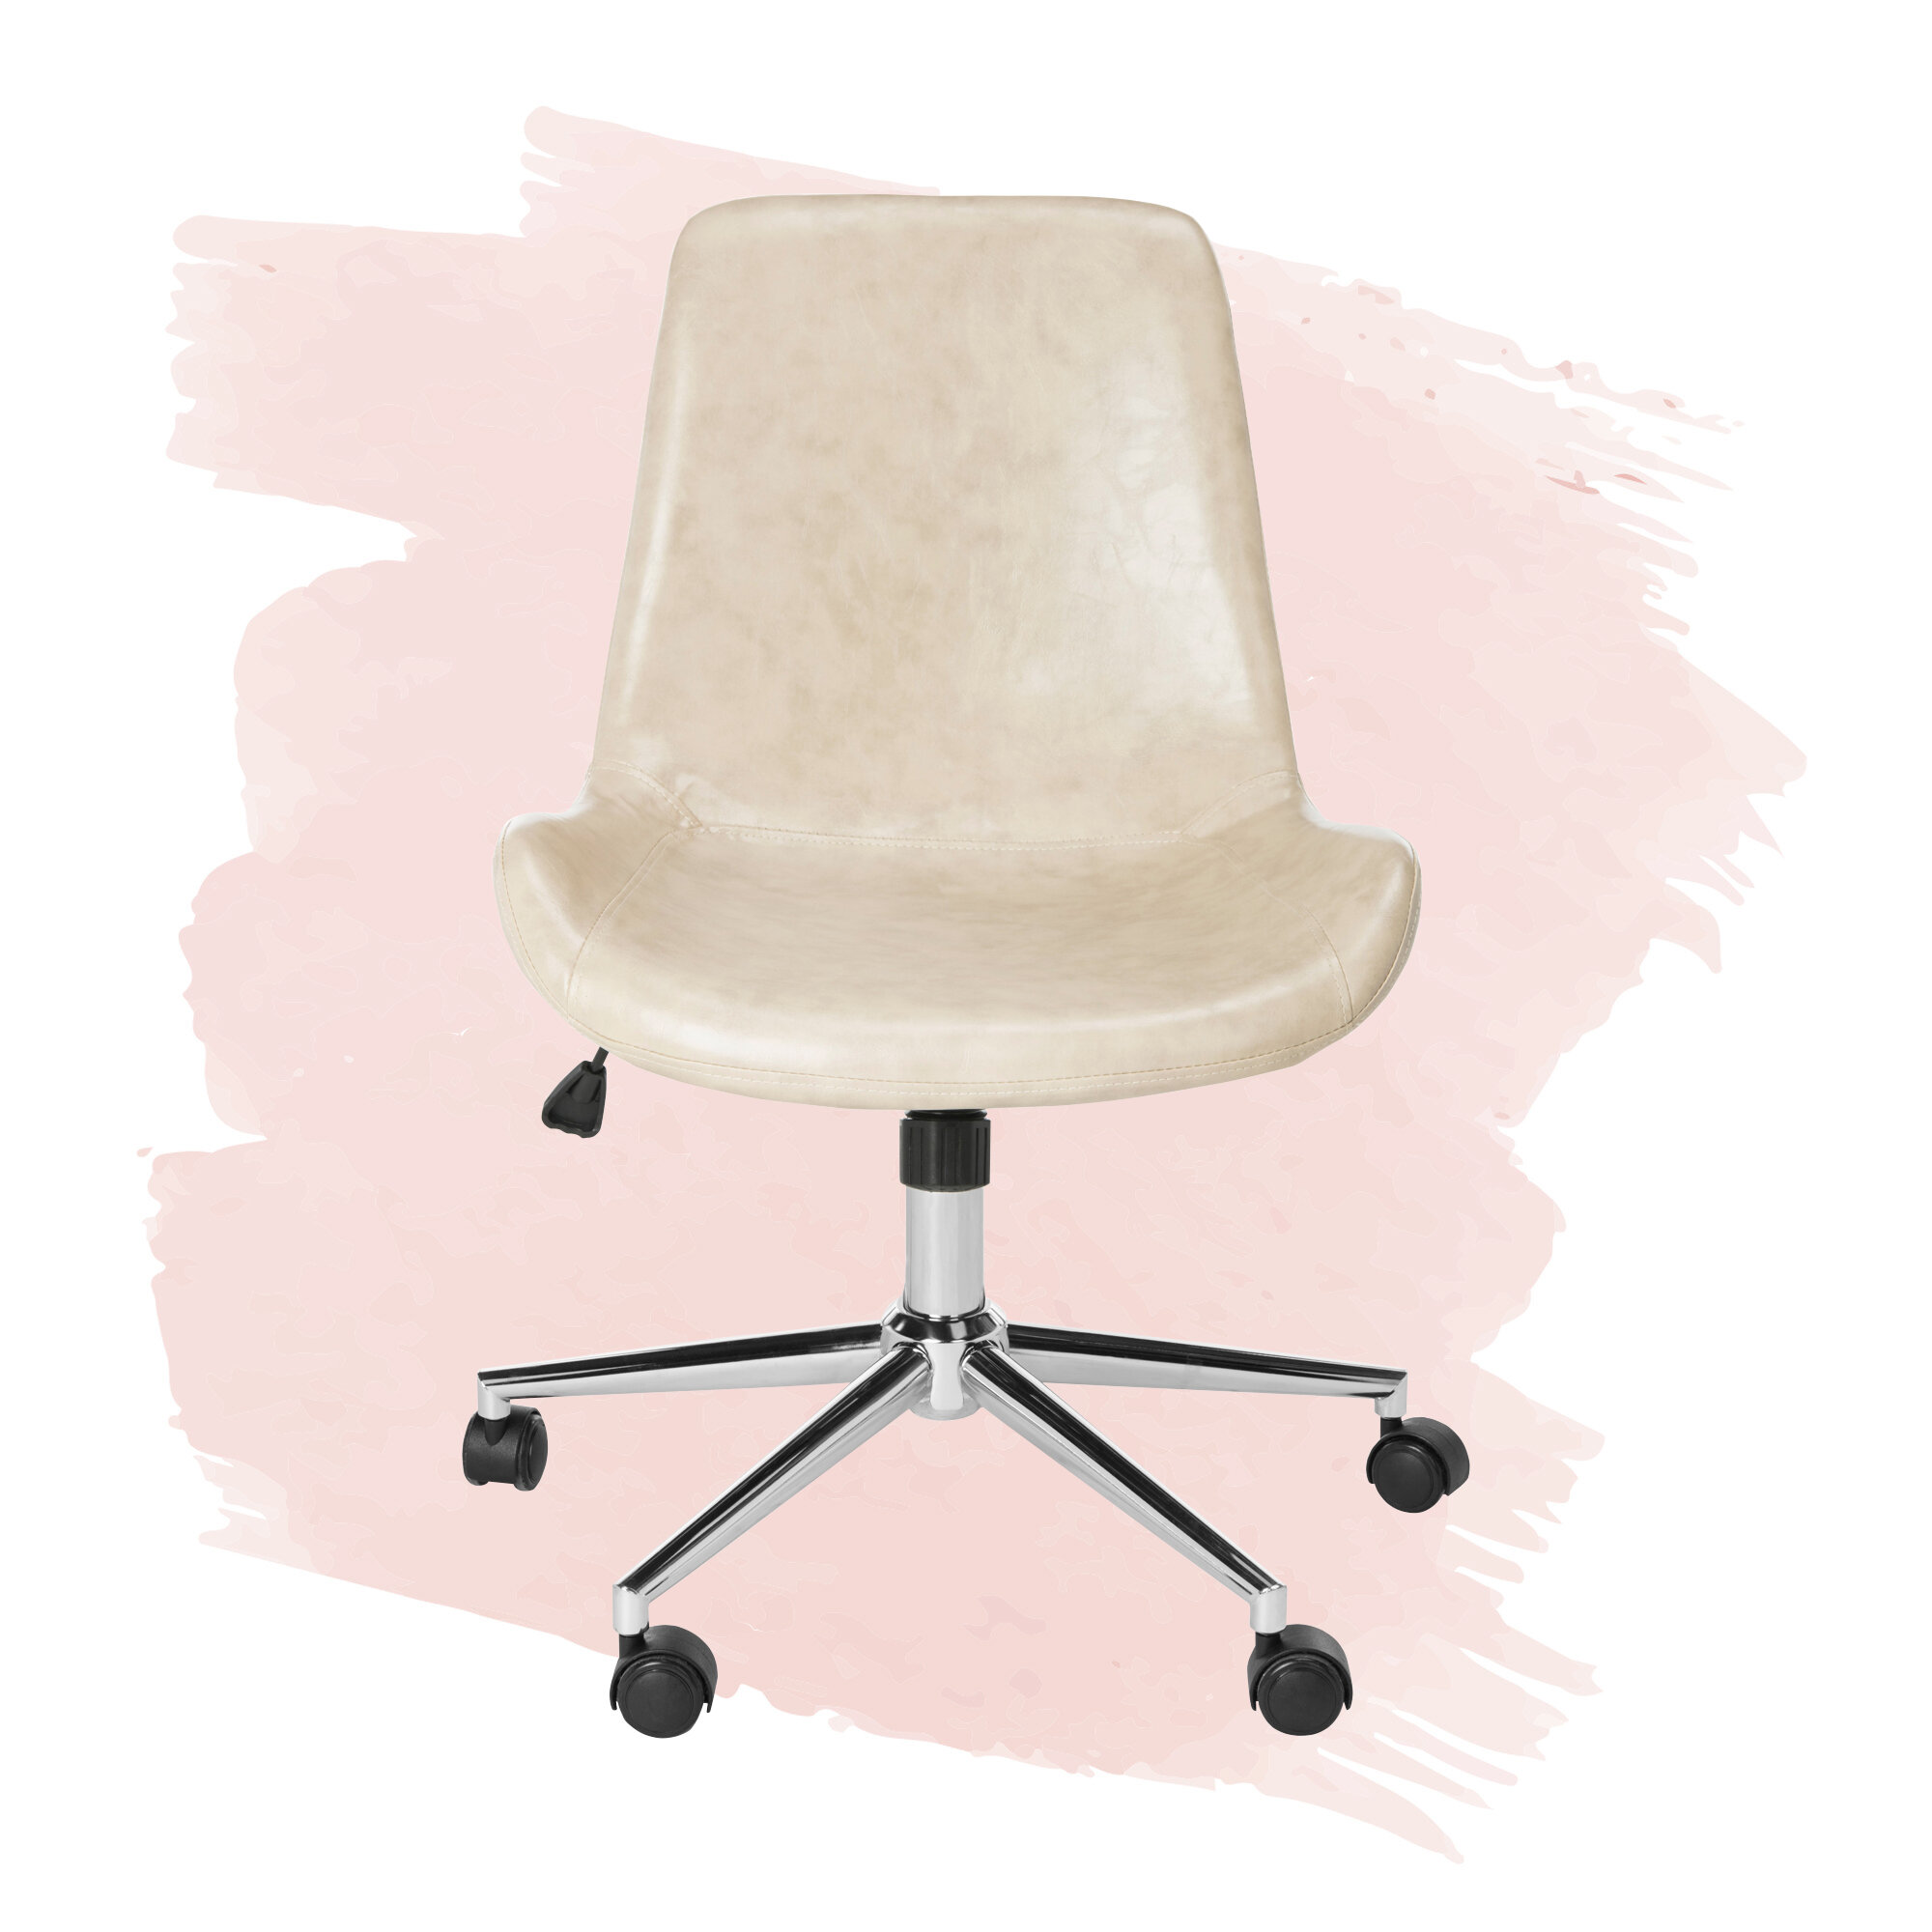 Beige Office Chairs Up To 80 Off This Week Only Wayfair